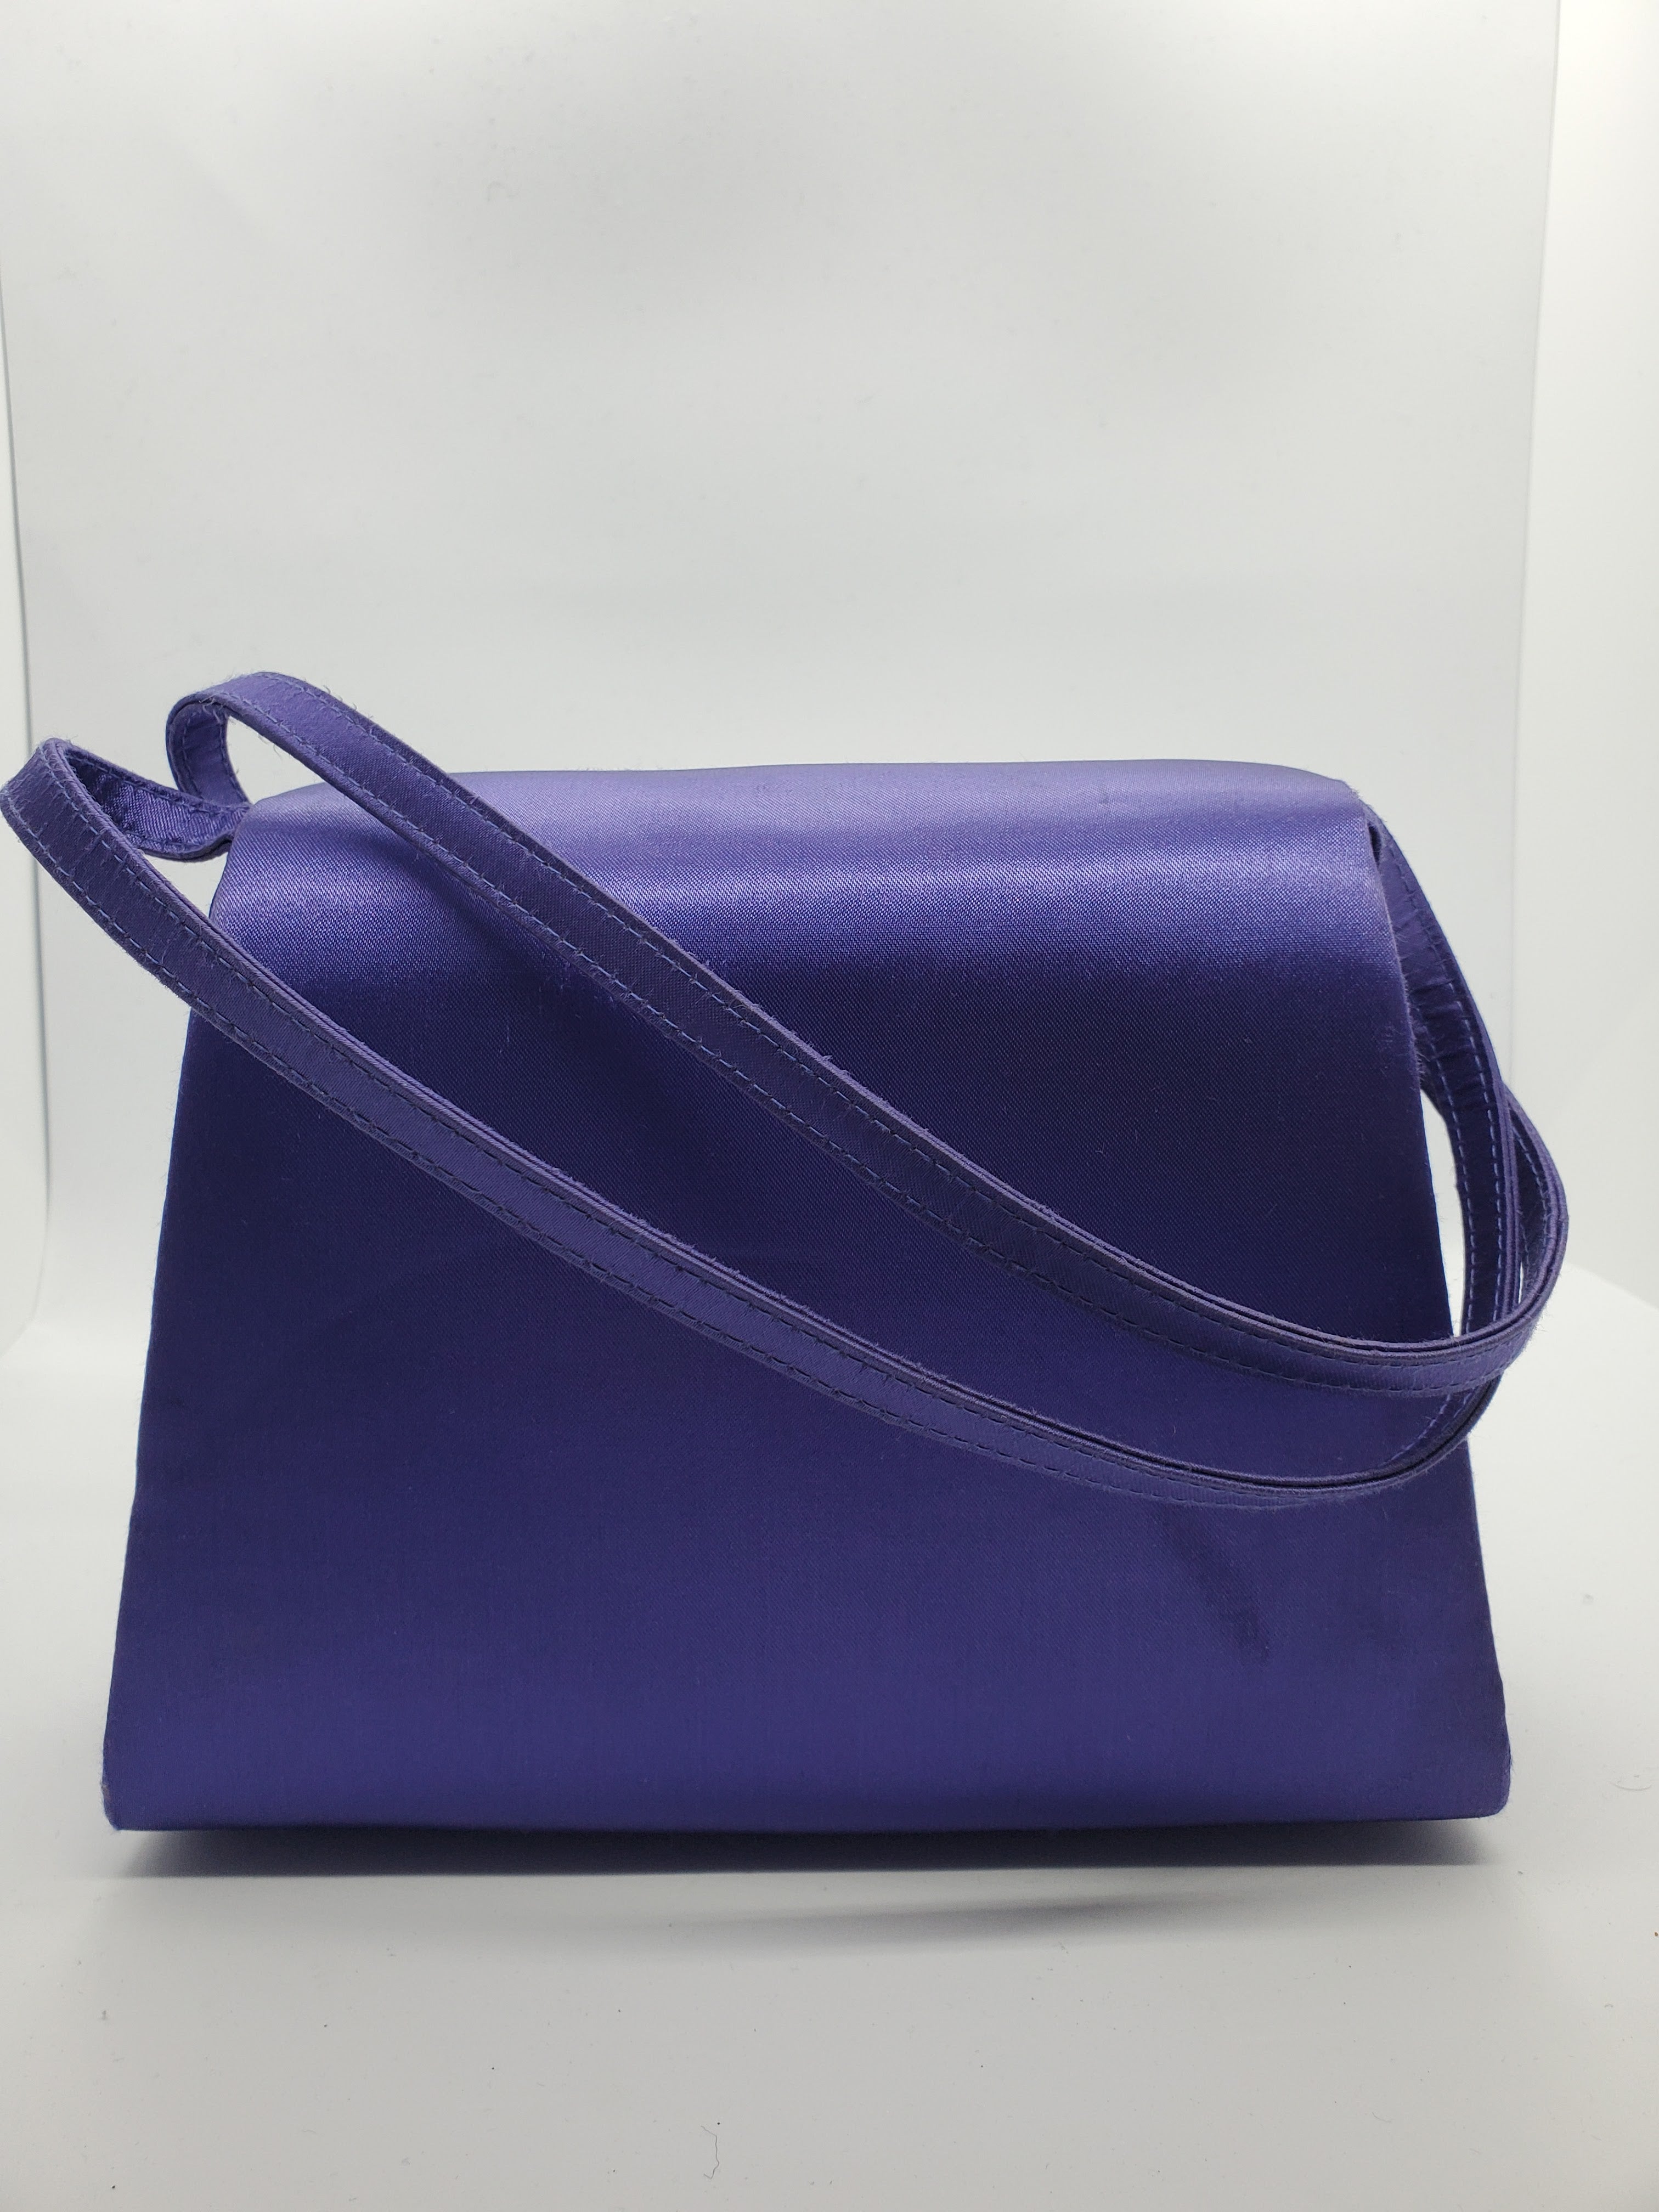 back view of purple handbag with woven details